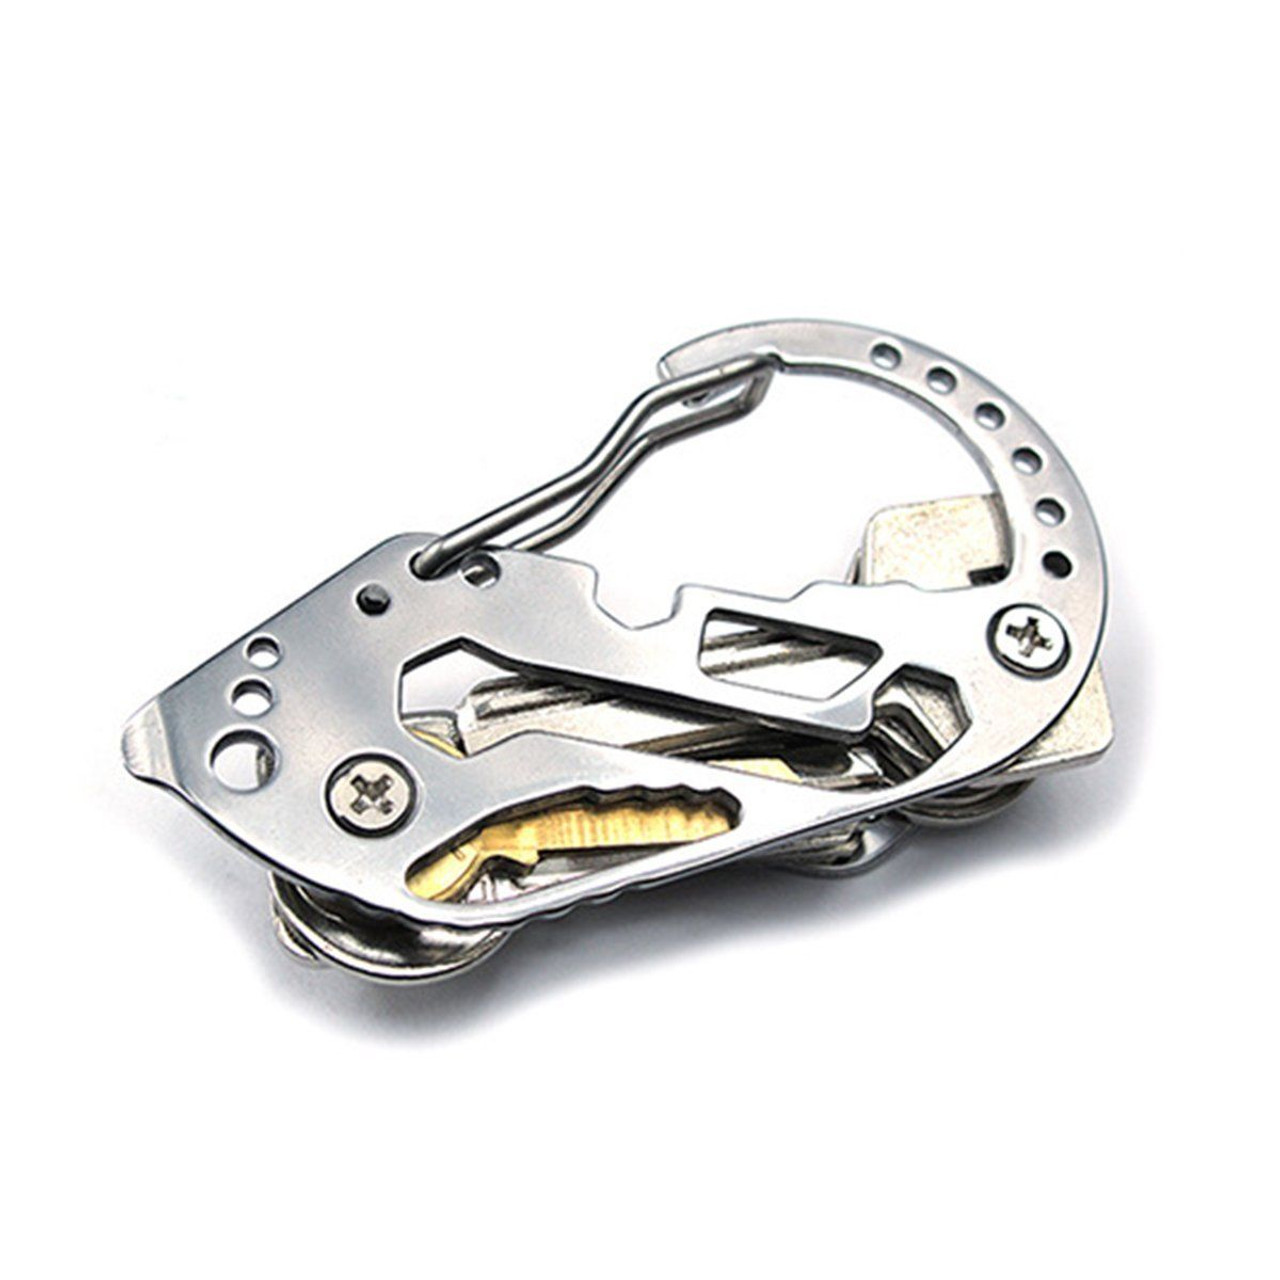 EDC Stainless Multi Tools Keychain Screwdriver Wrench Carabiner Pocket Tools